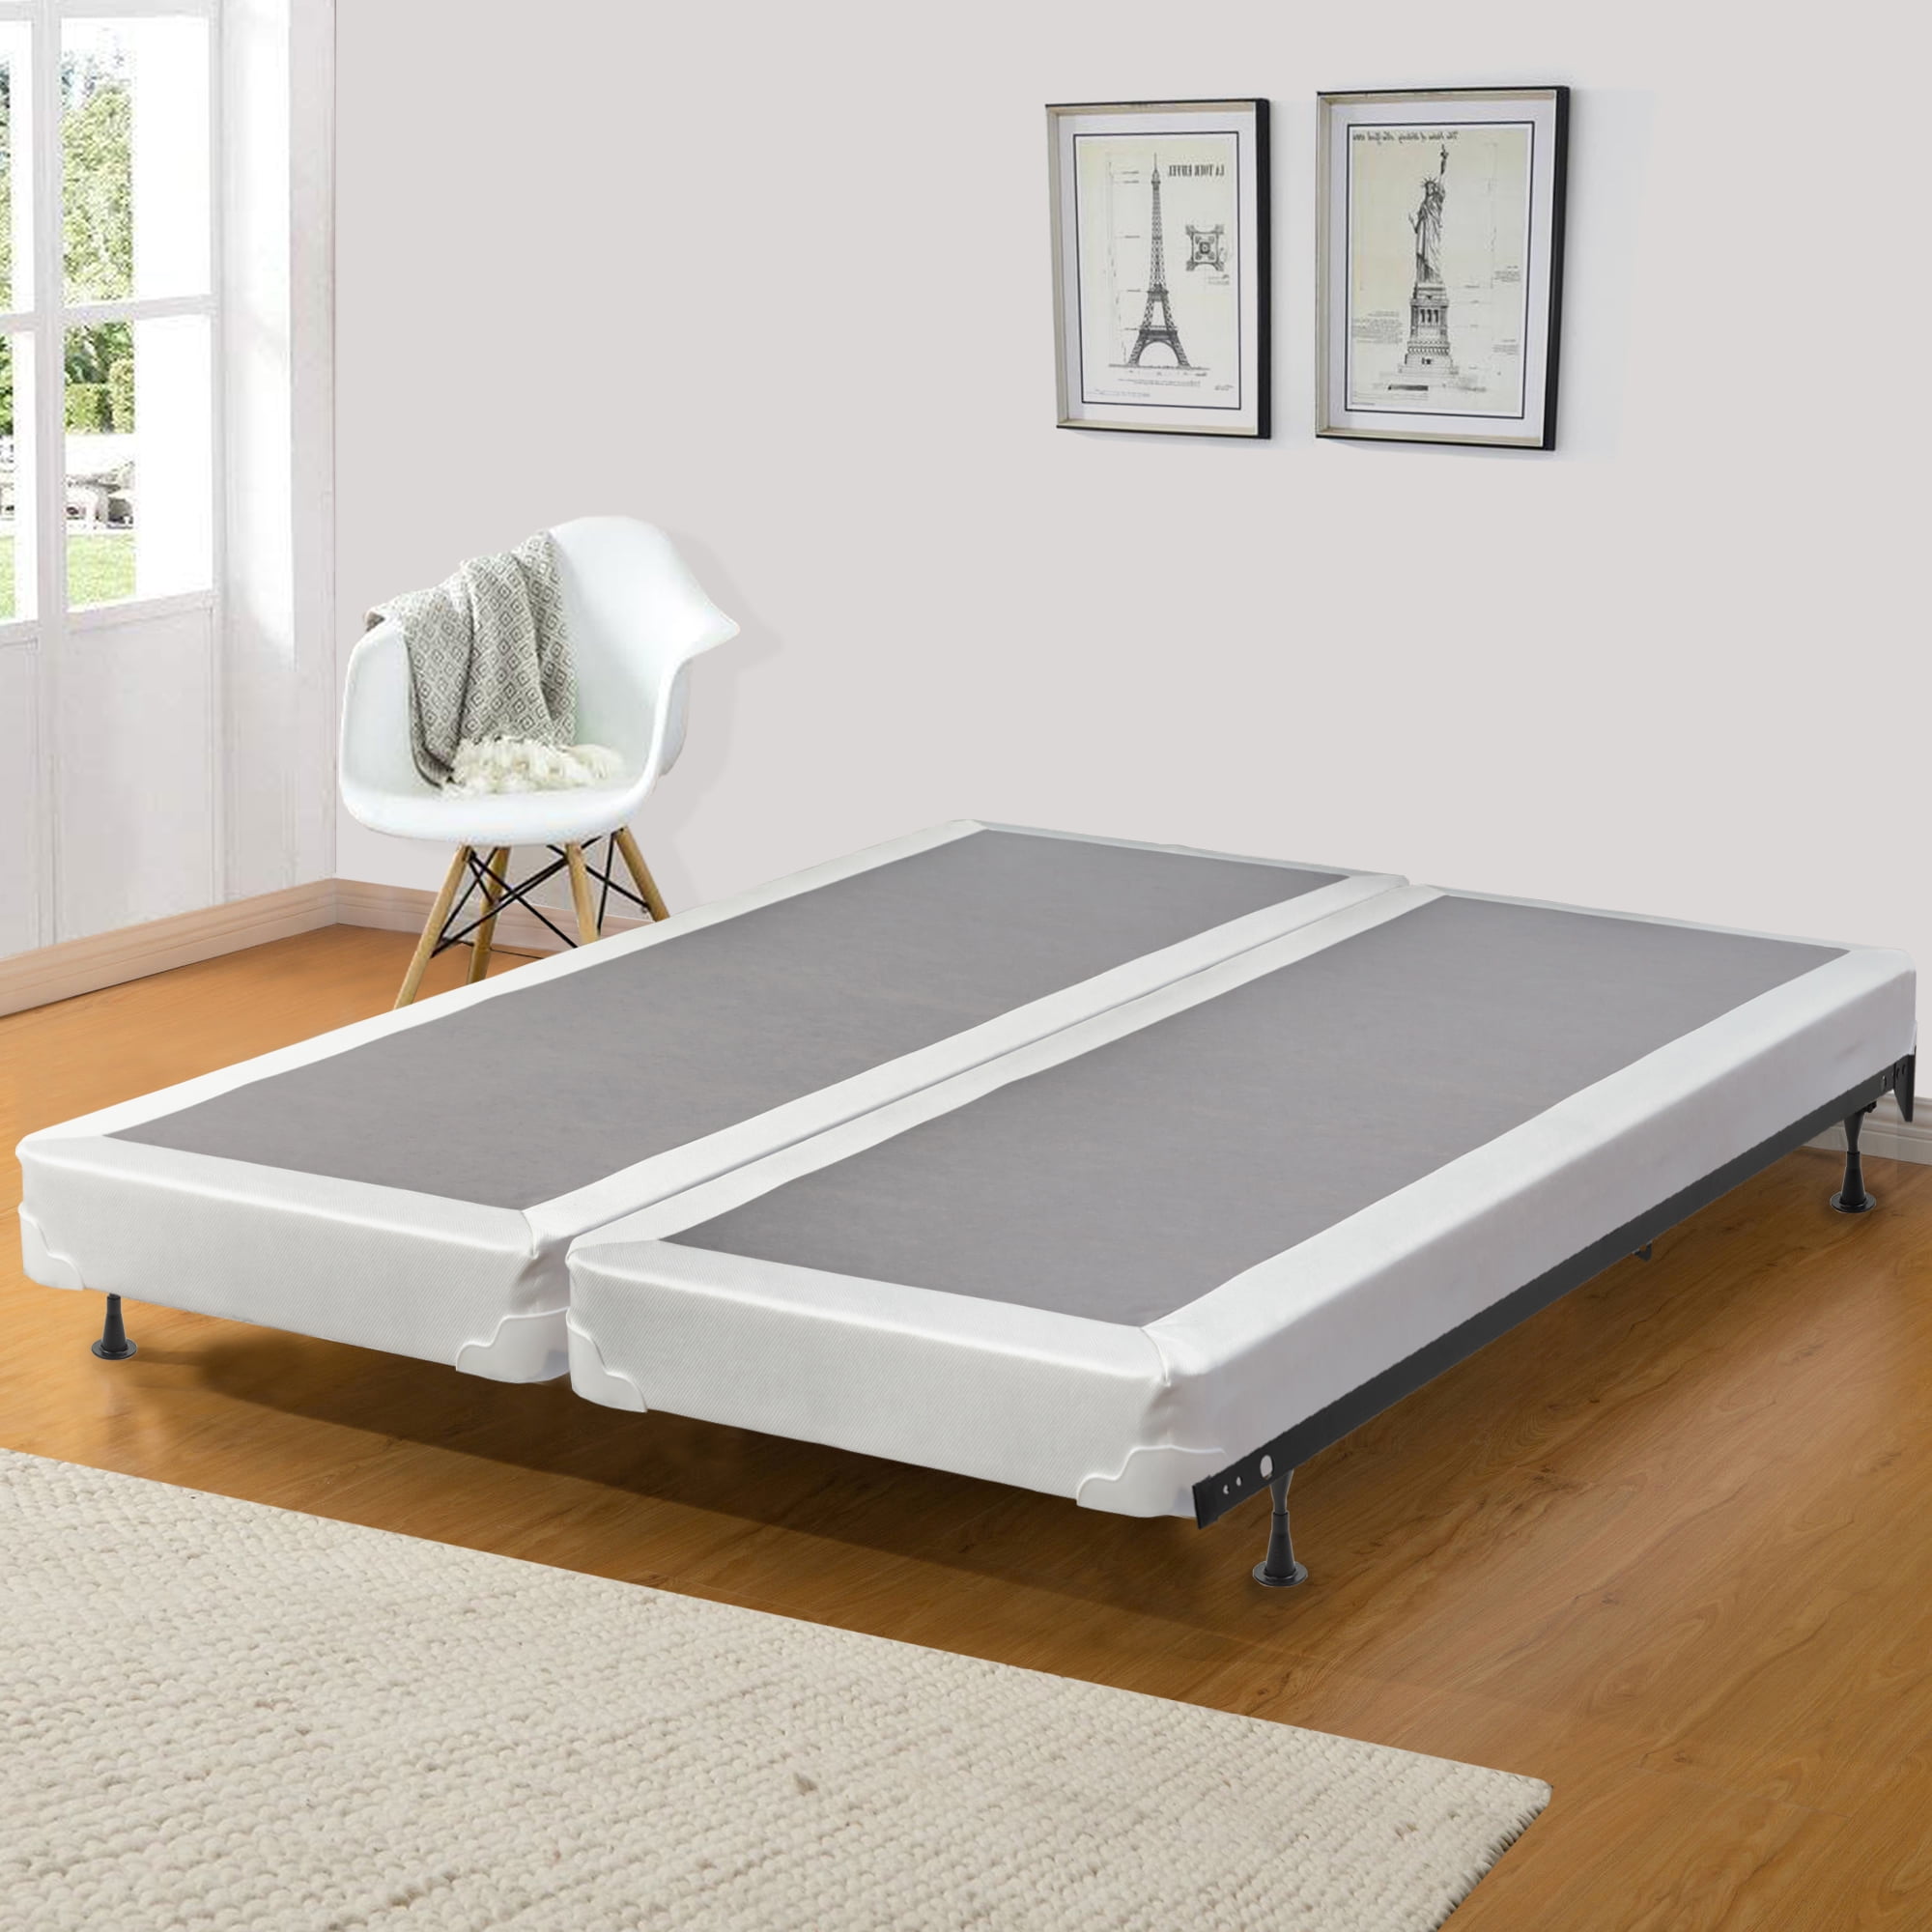 Continental Sleep P 225F-3//3-2S Fully Assembled Orthopedic Back Support Long Lasting 10 Medium Plush Mattress and Split Box Spirng with Frame Twin